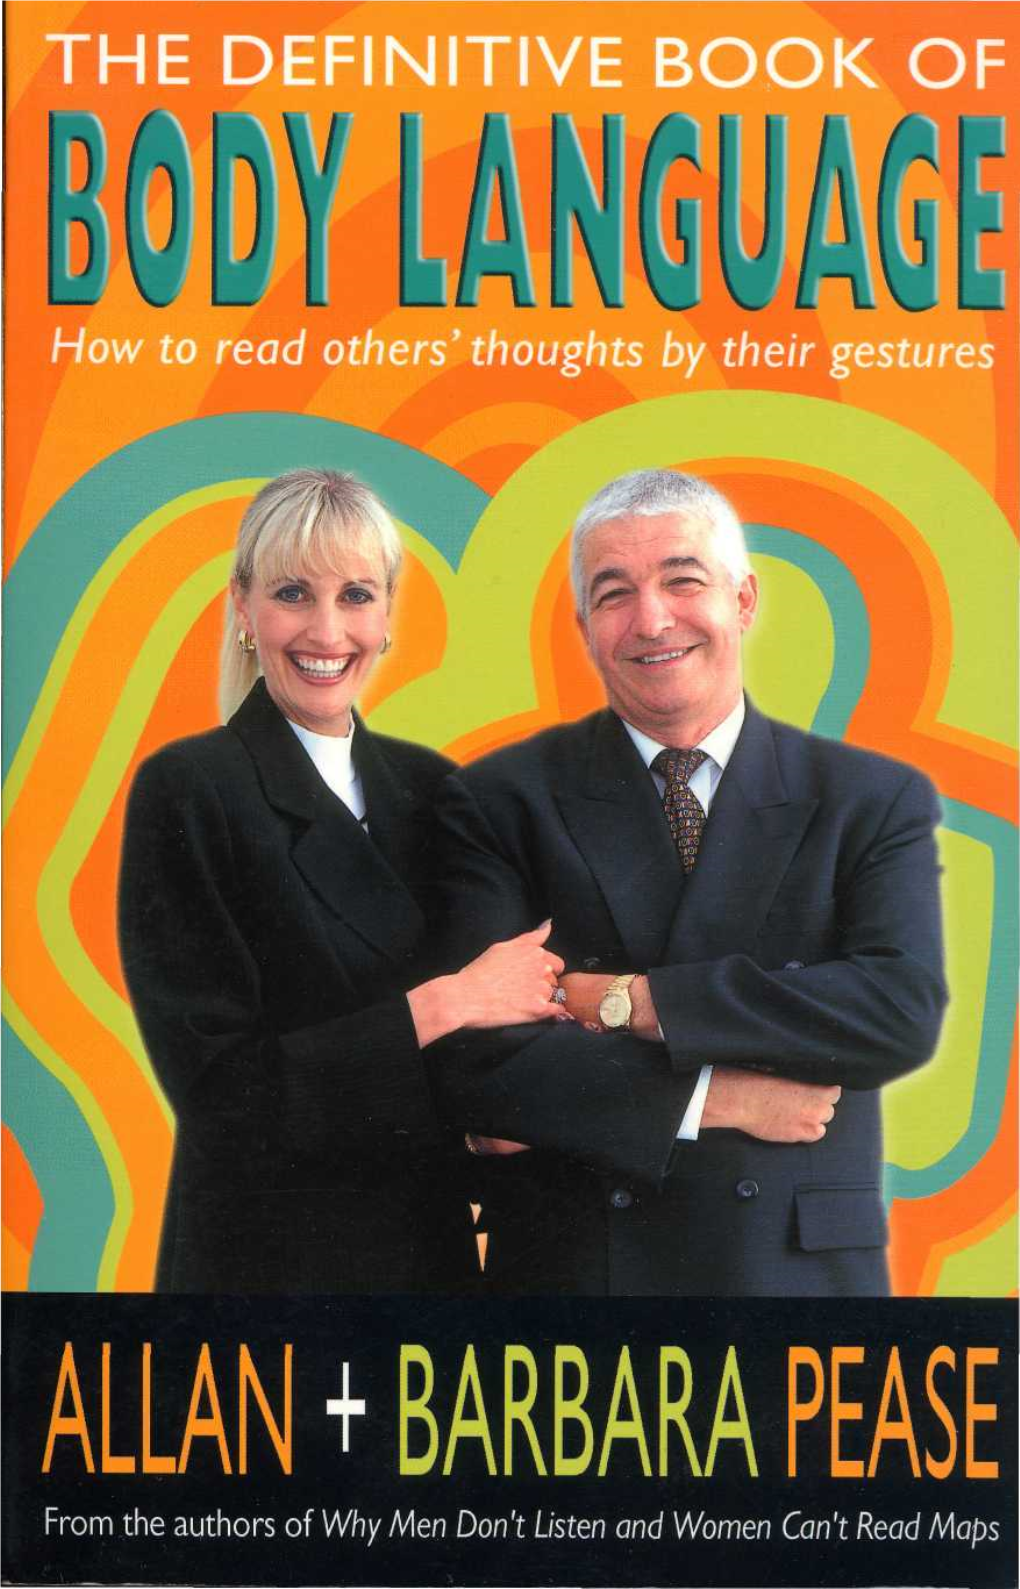 The Definitive Book of BODY LANGUAGE ALSO by ALLAN & BARBARA PEASE Published by Pease International